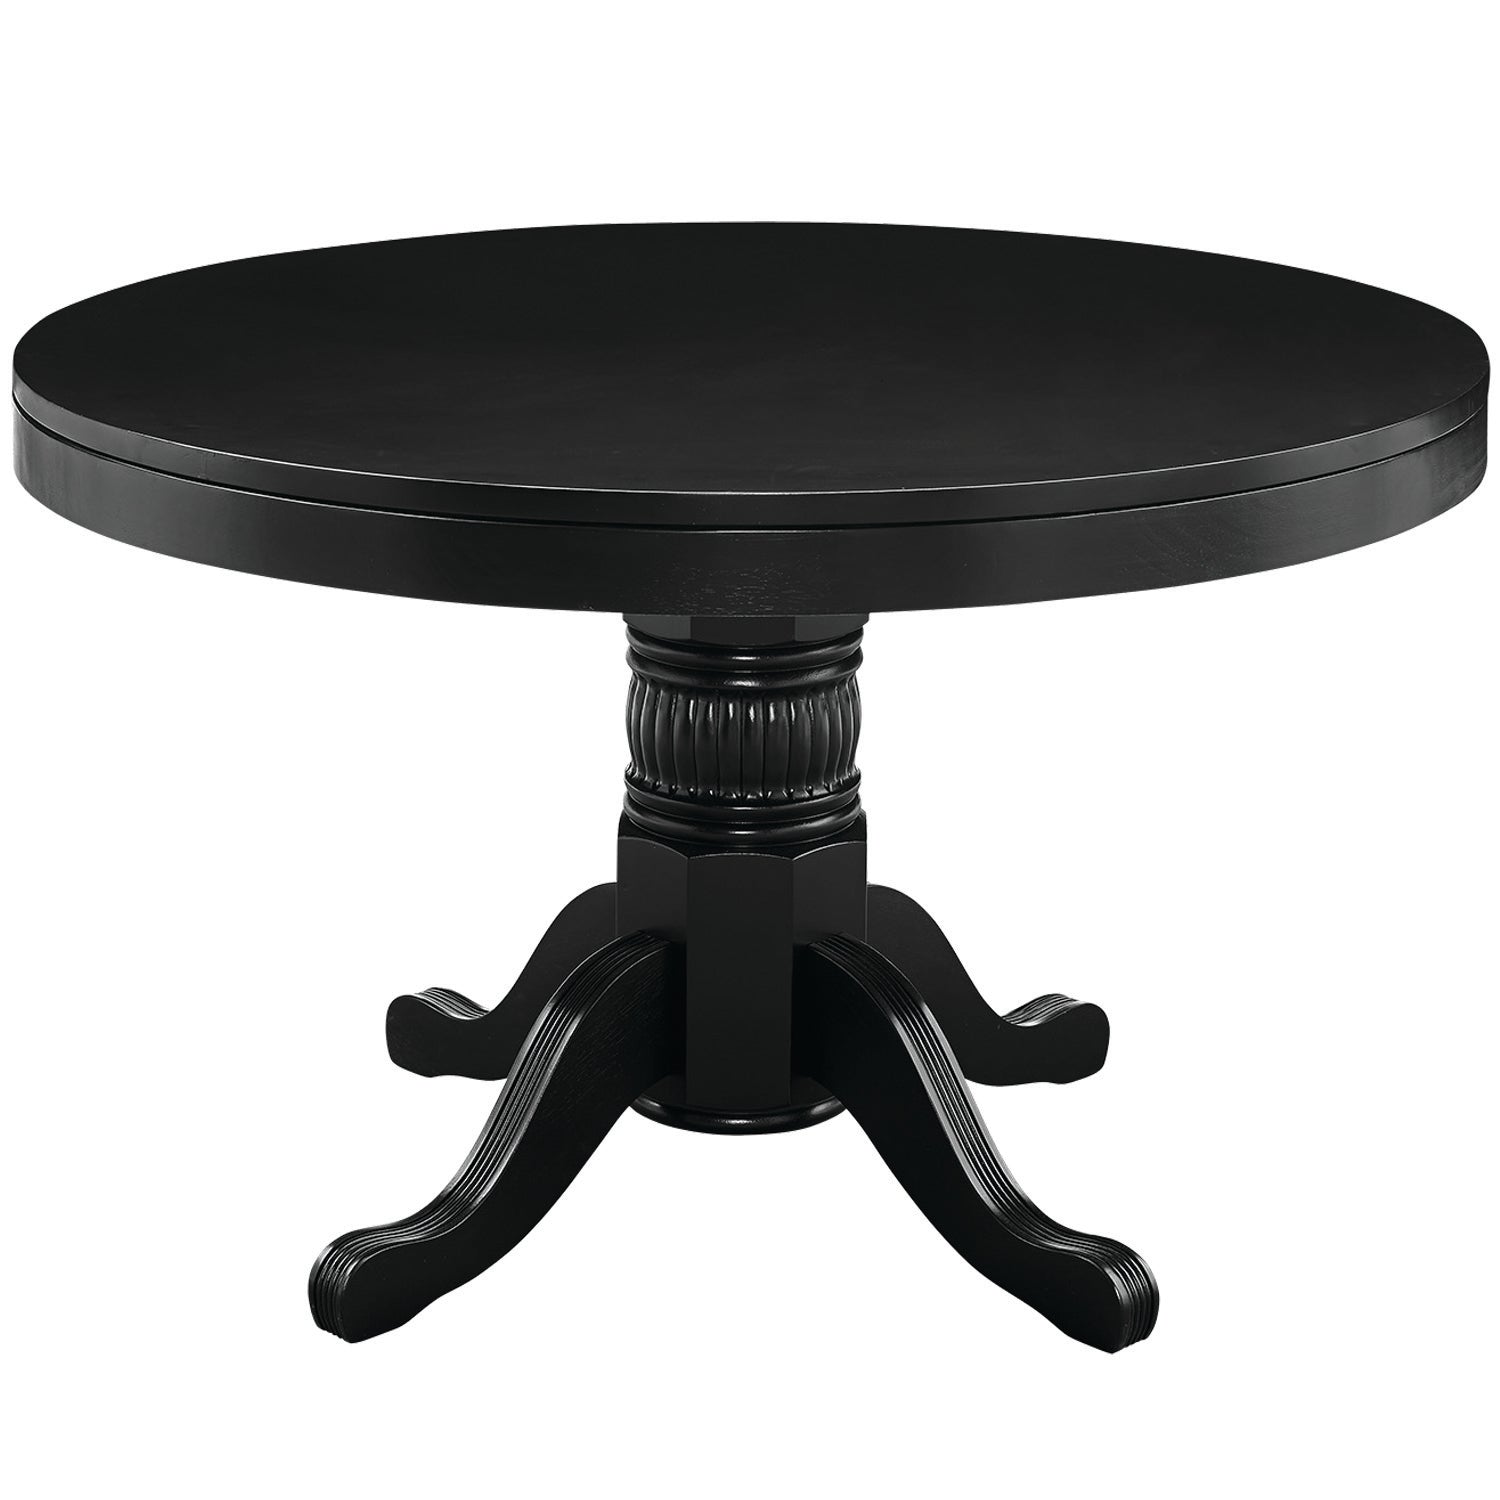 48 Inch Round Black Poker Table